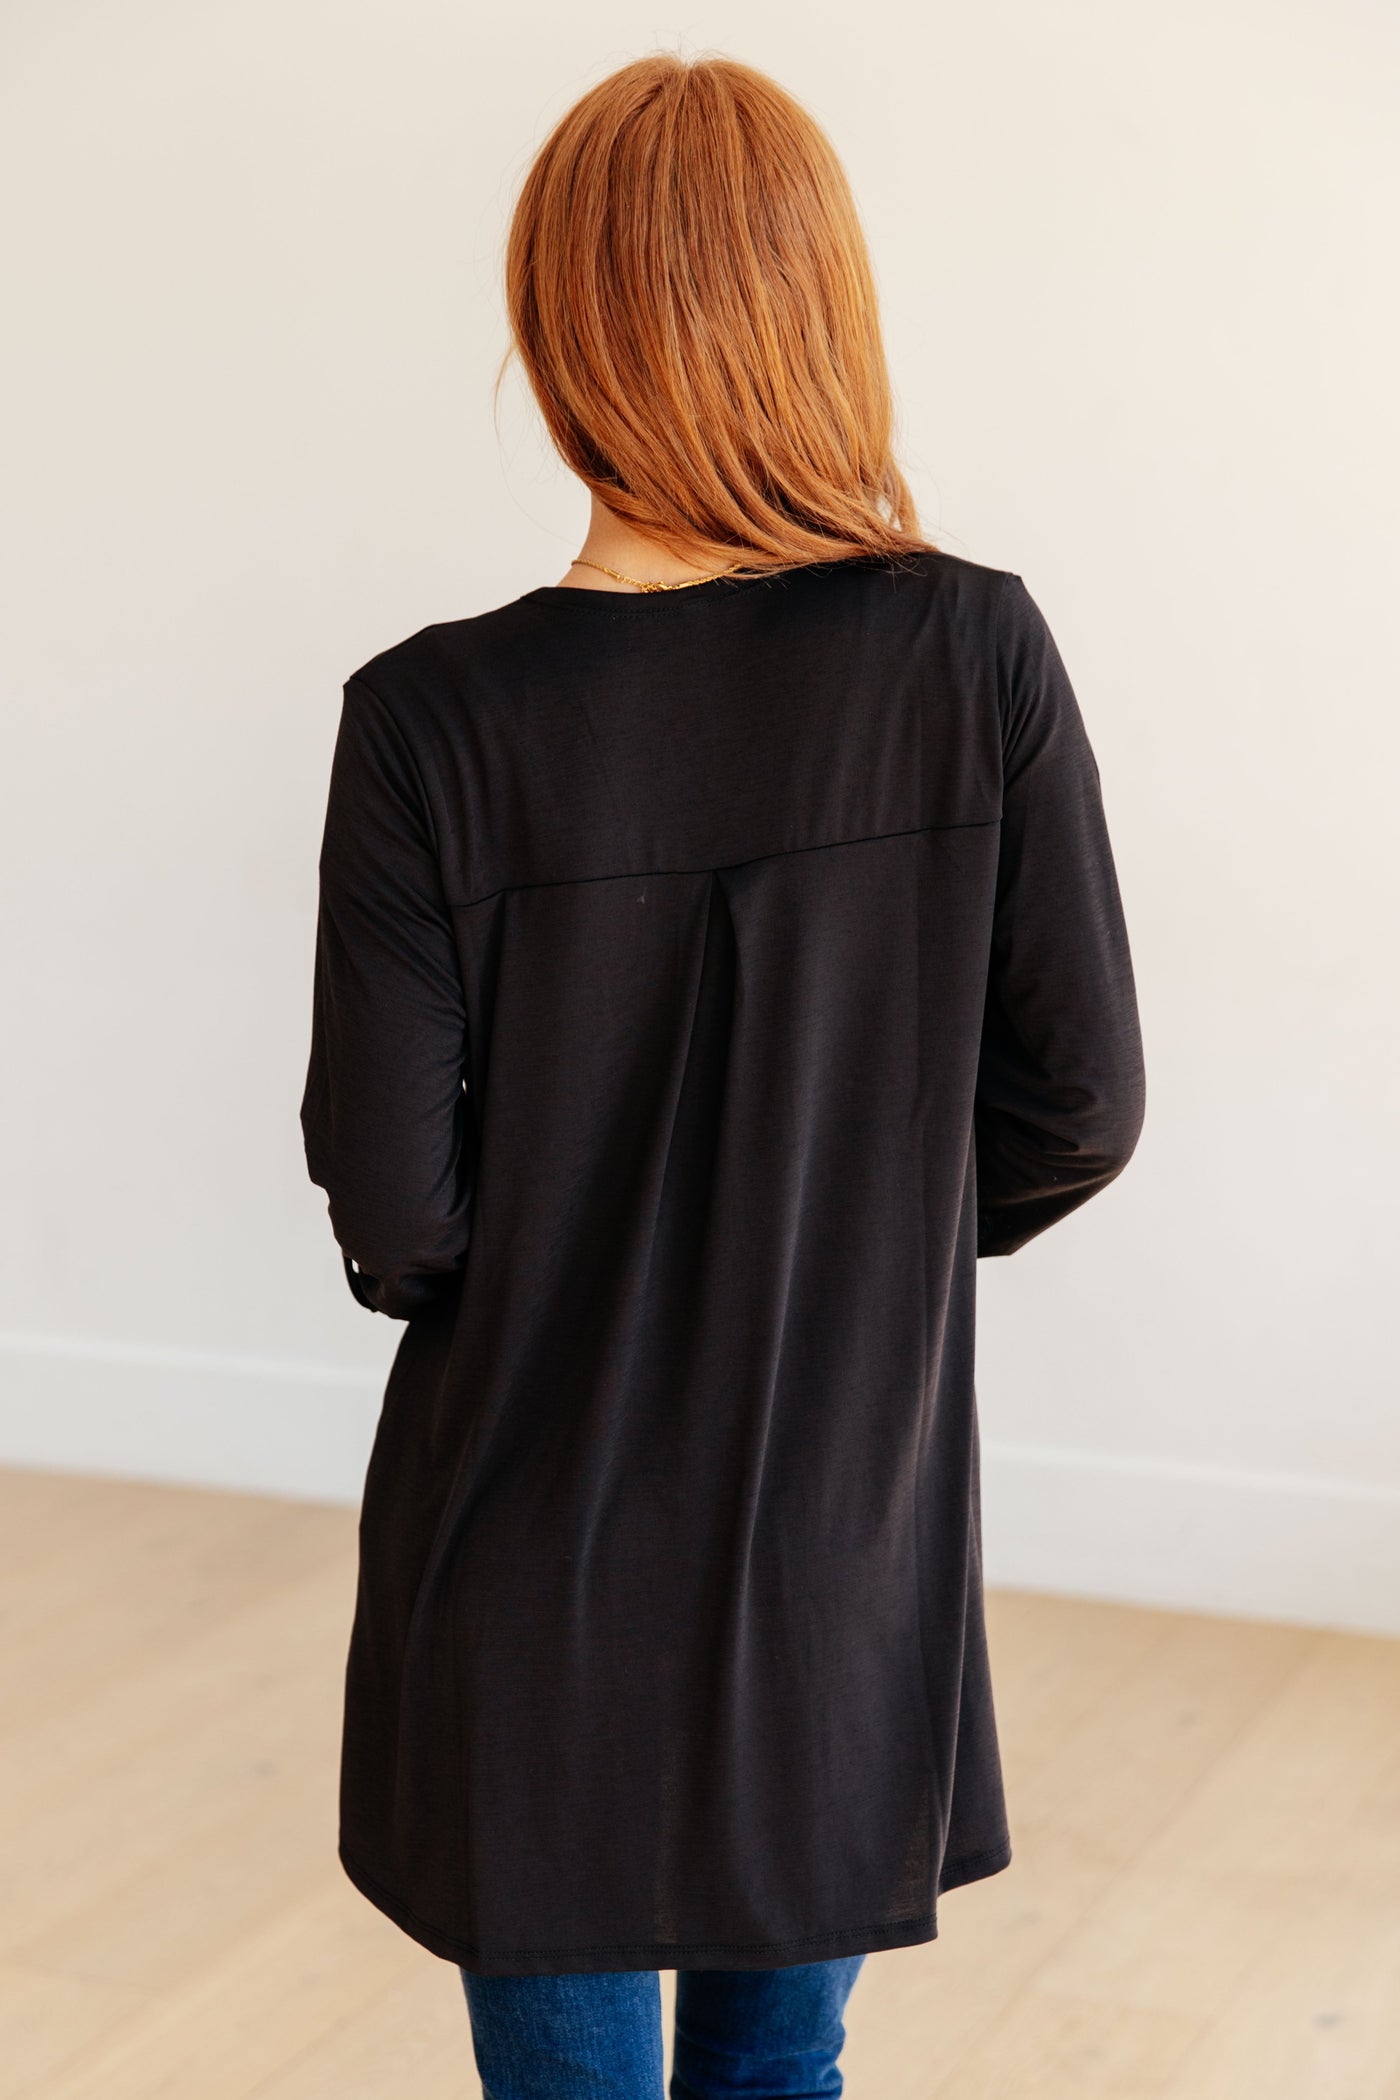 Lizzy Cardigan in Black Southern Soul Collectives